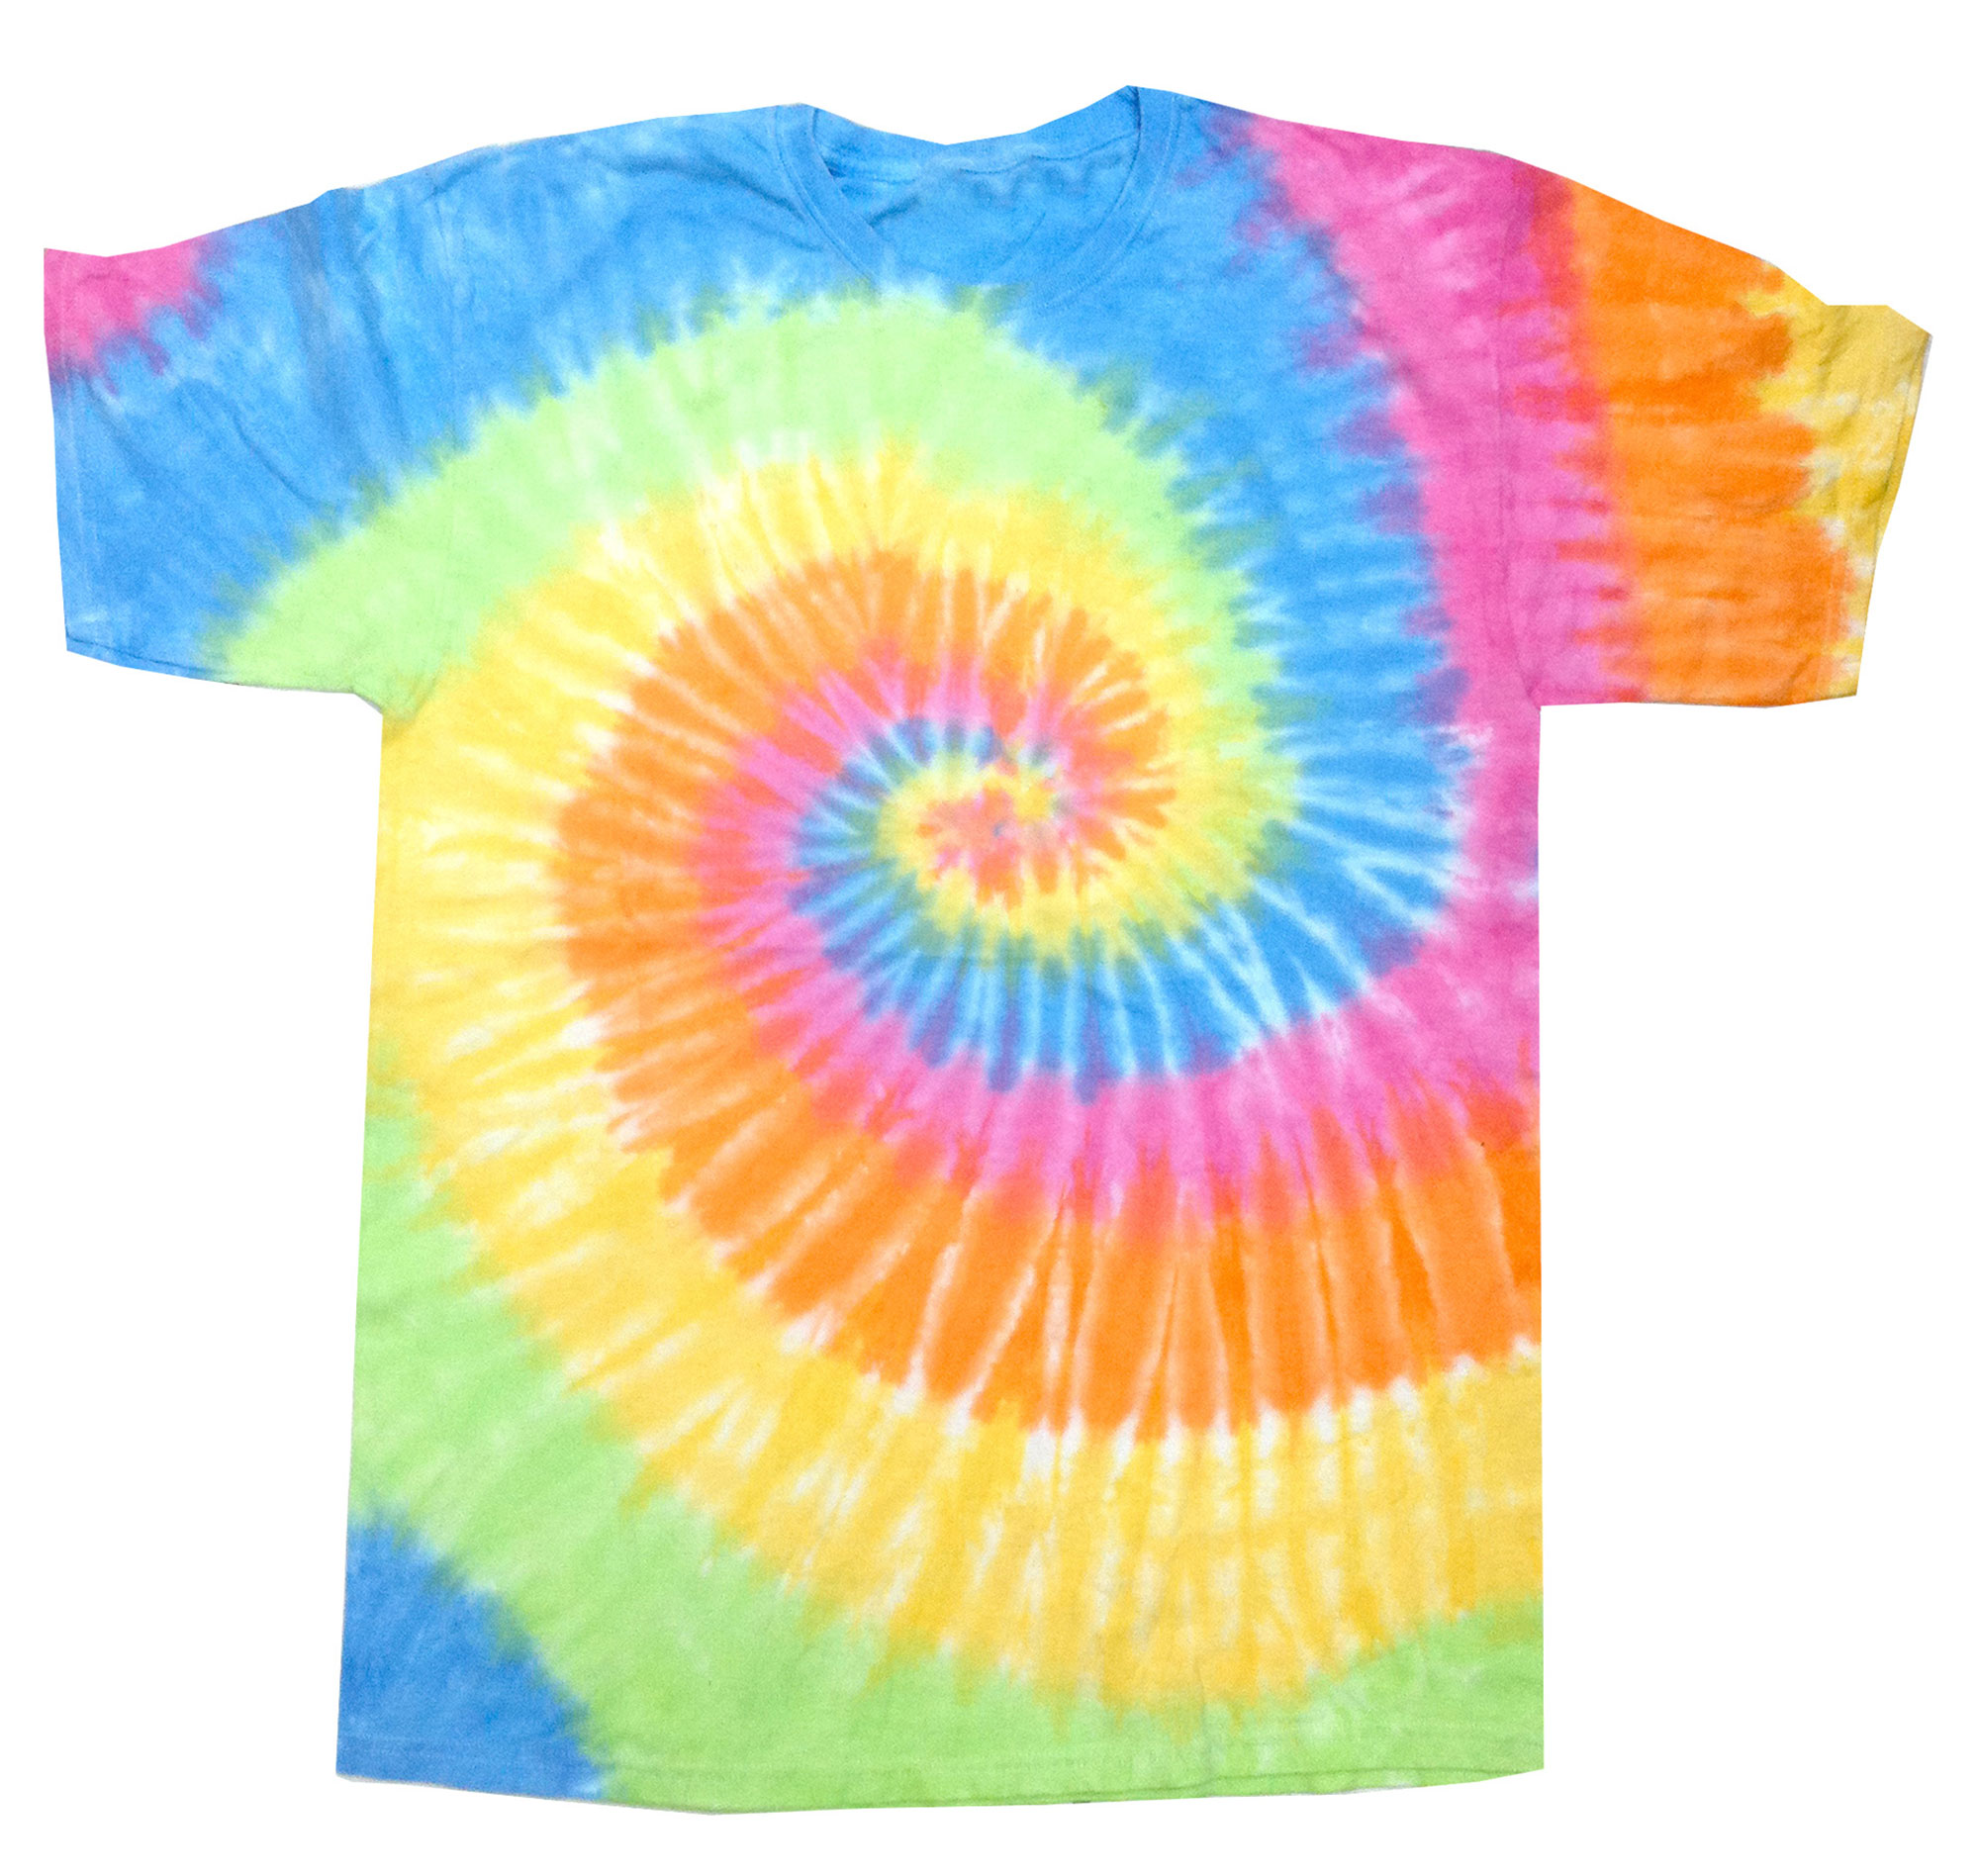 TD954 - Reactive Dyed T-Shirt - One Stop